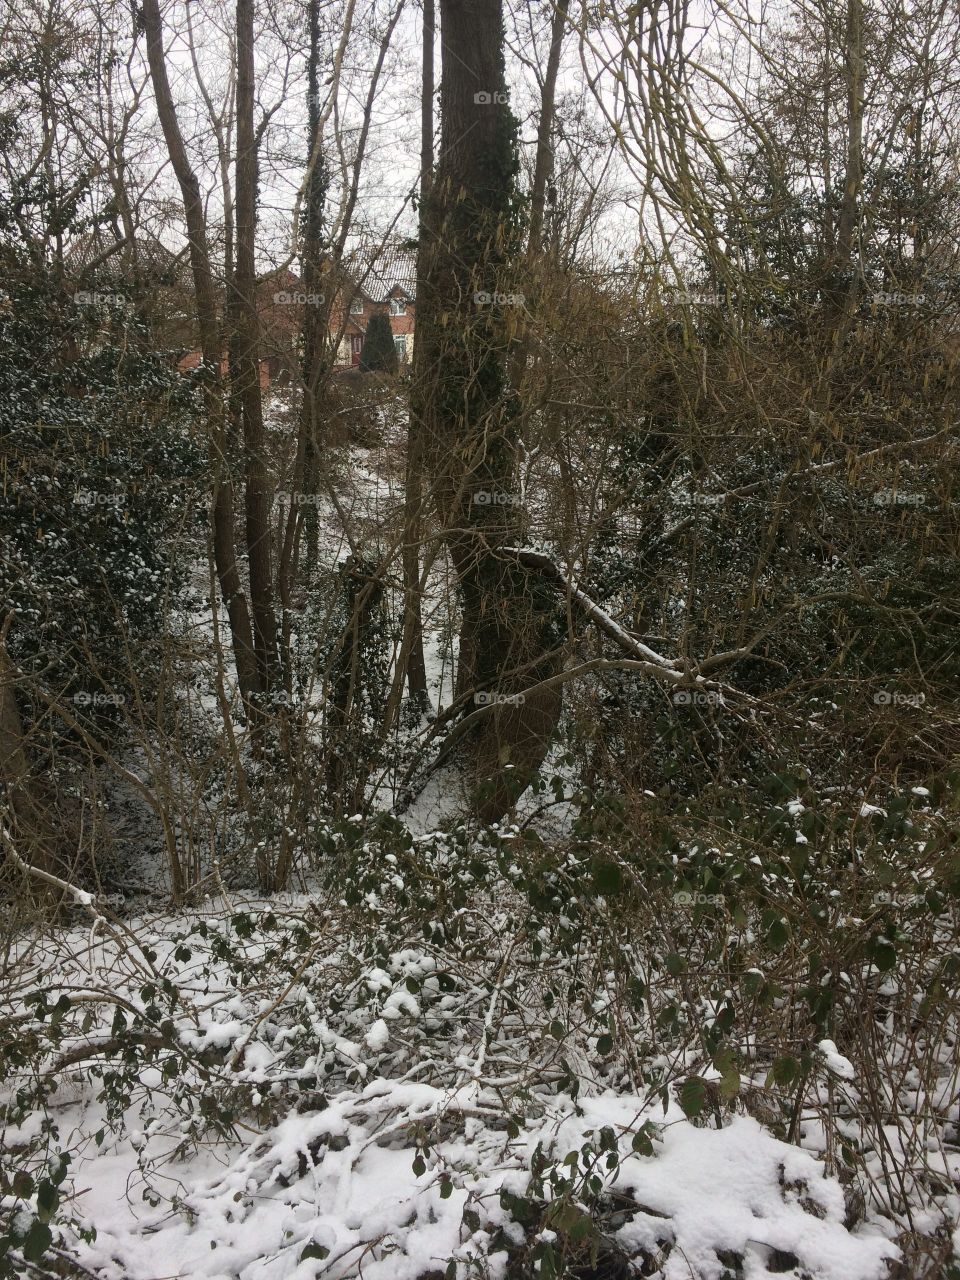 The gloating snow through the trees. 